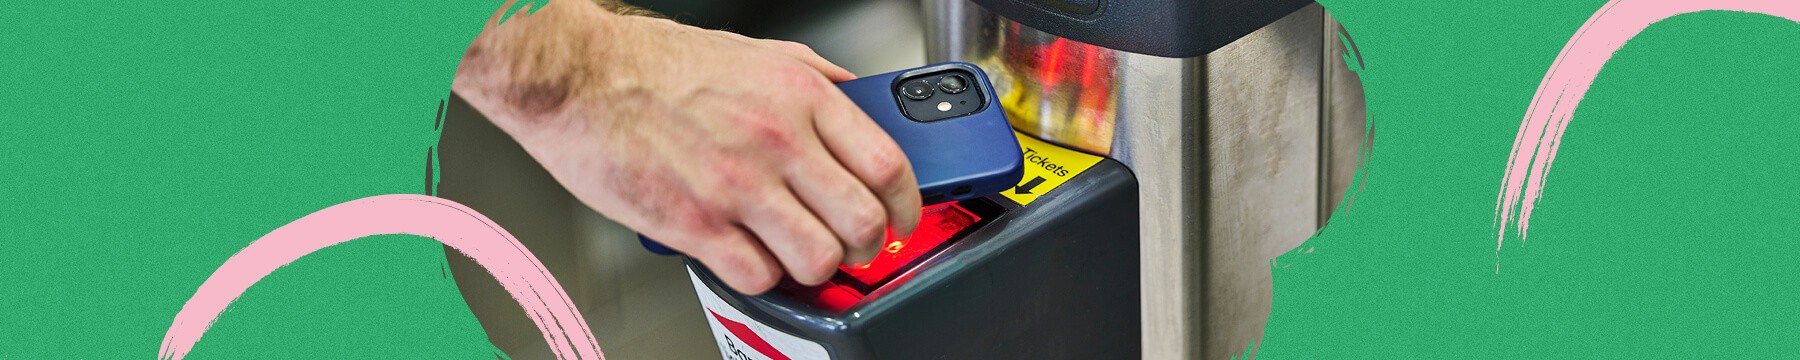 A person using their phone to go through a ticket barrier